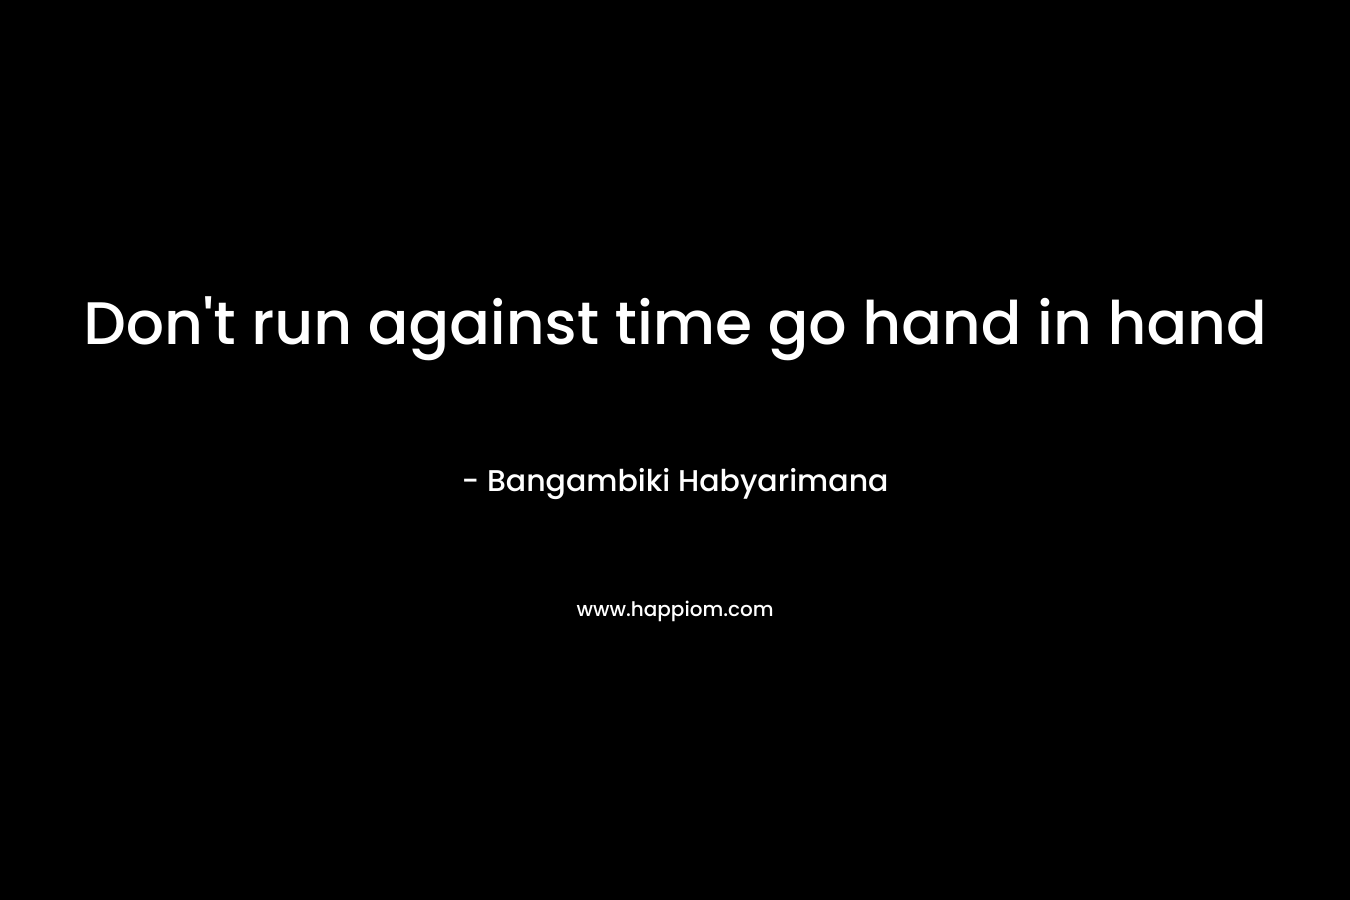 Don't run against time go hand in hand